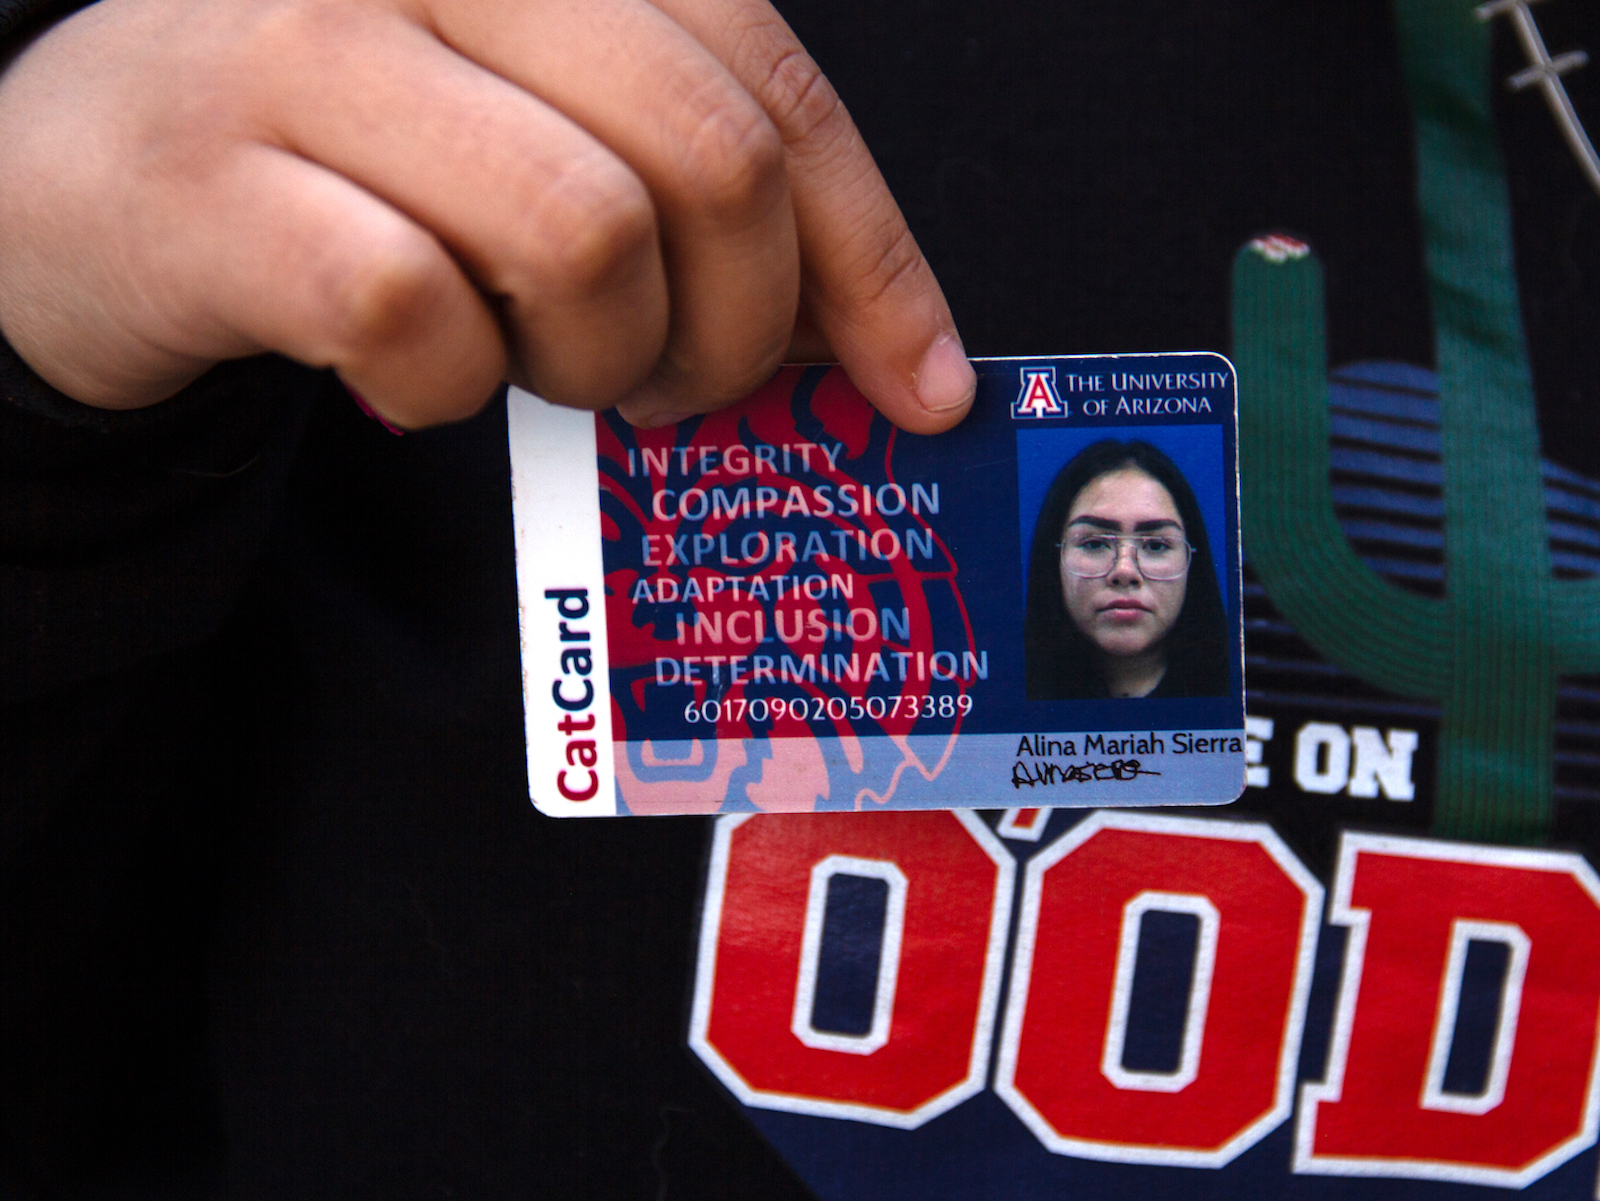 a hand holds an ID card with a photo and ID number